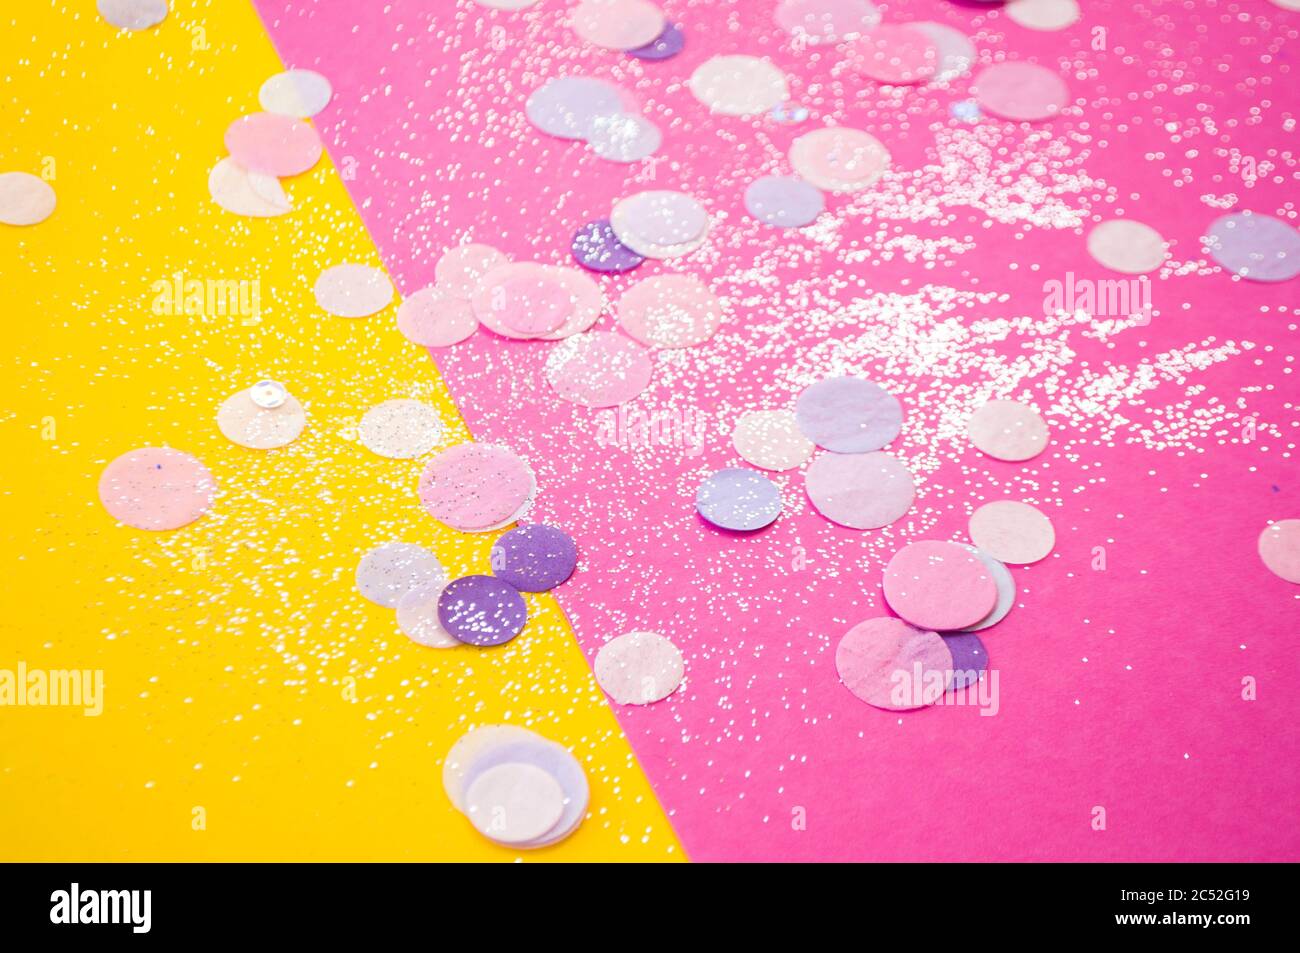 Colorful confetti, sparkles on bright pink and yellow background. Festive background. Stock Photo